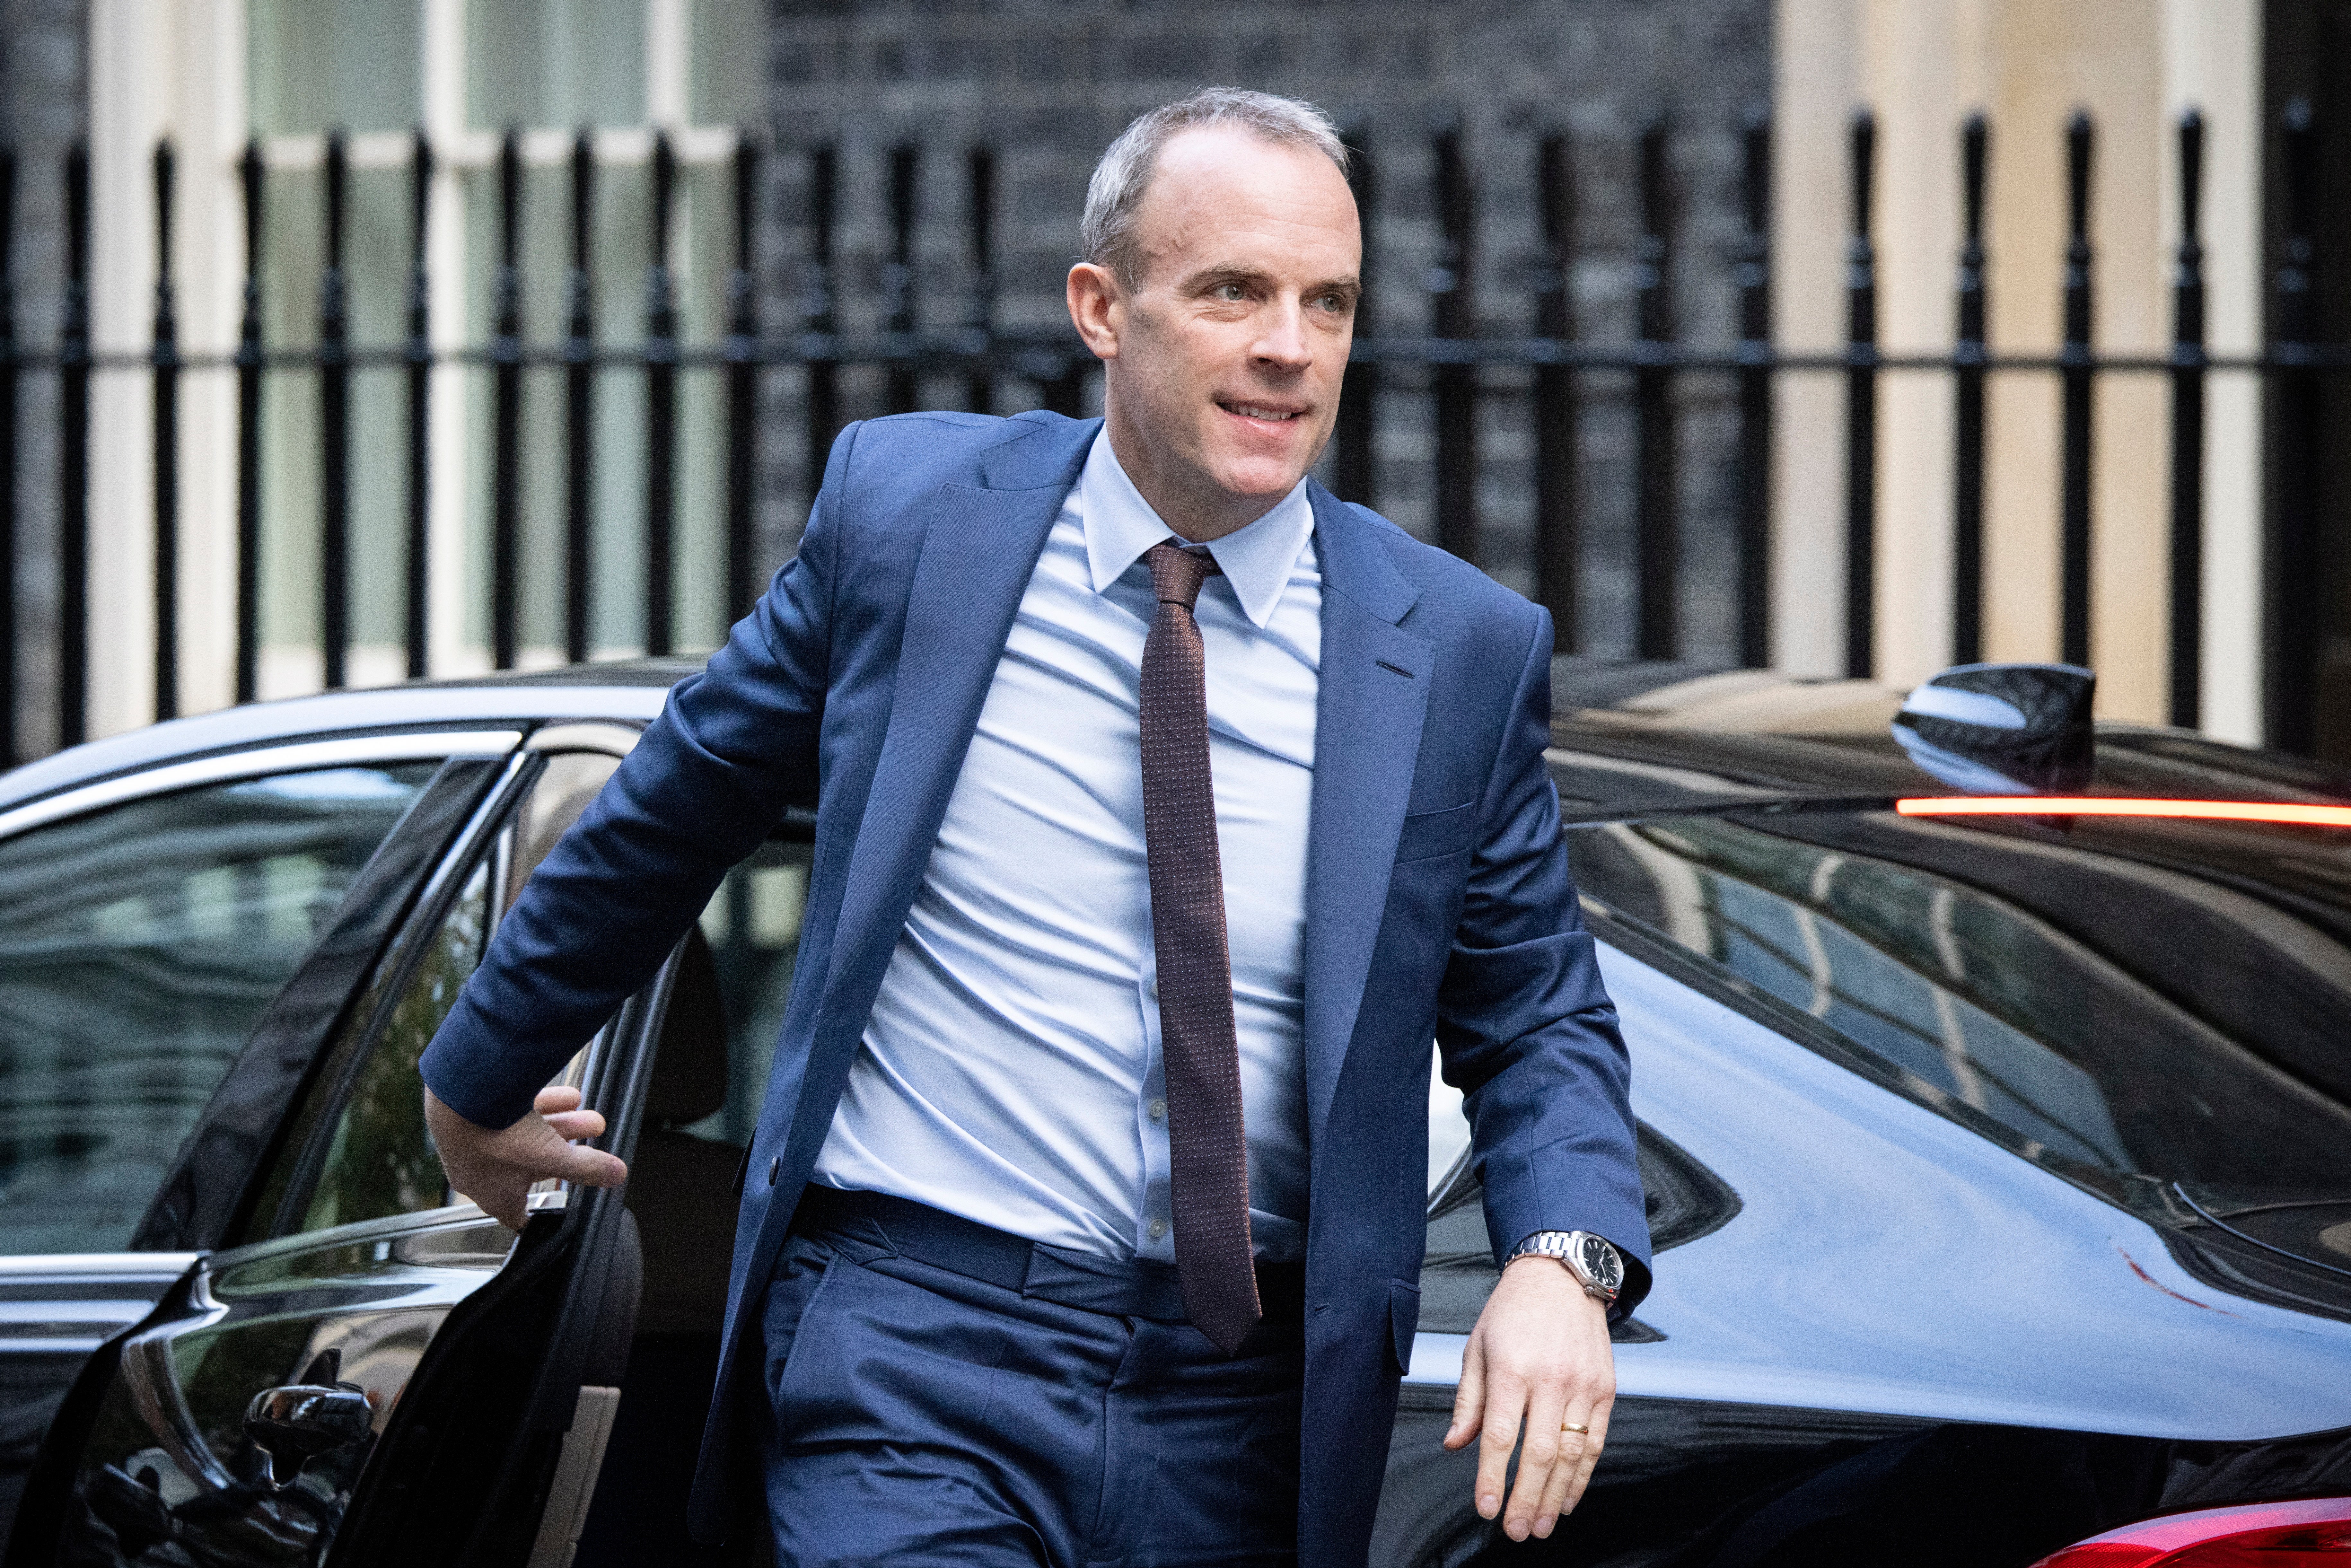 Dominic Raab is ‘avoiding scrutiny of his failings in the criminal justice system’, it is claimed